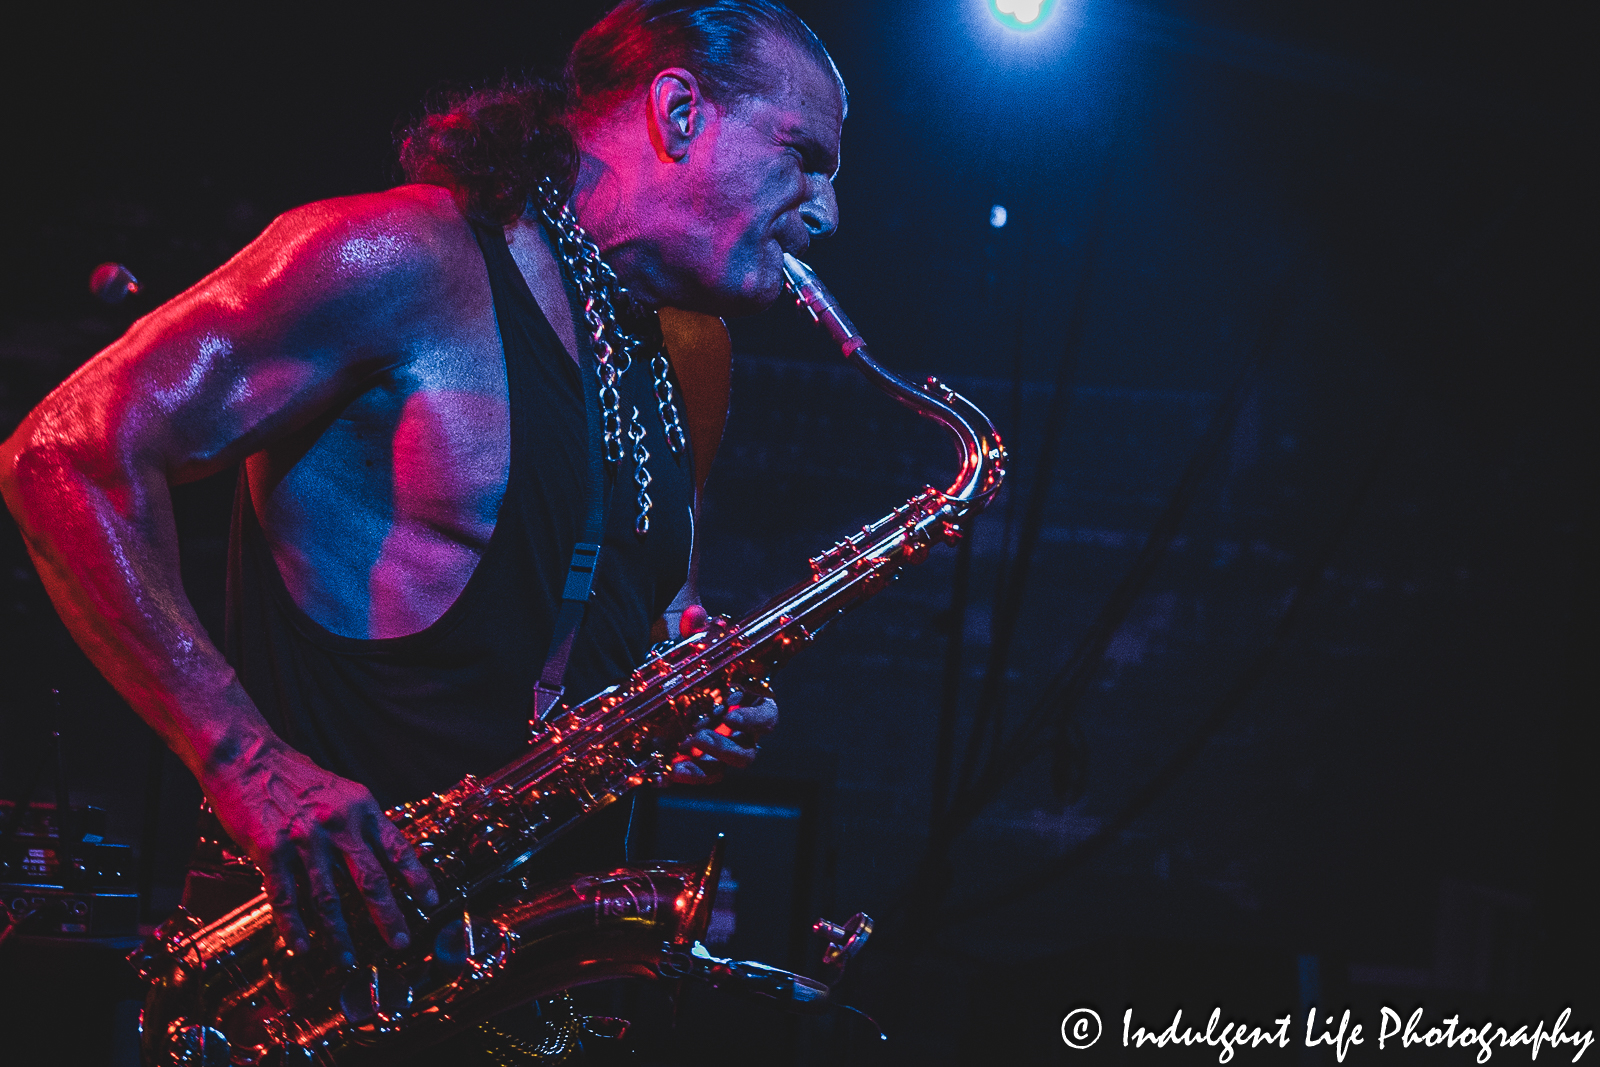 Tim Cappello playing "I Still Believe" live on the saxophone at the recordBar in downtown Kansas City, MO on June 15, 2023.